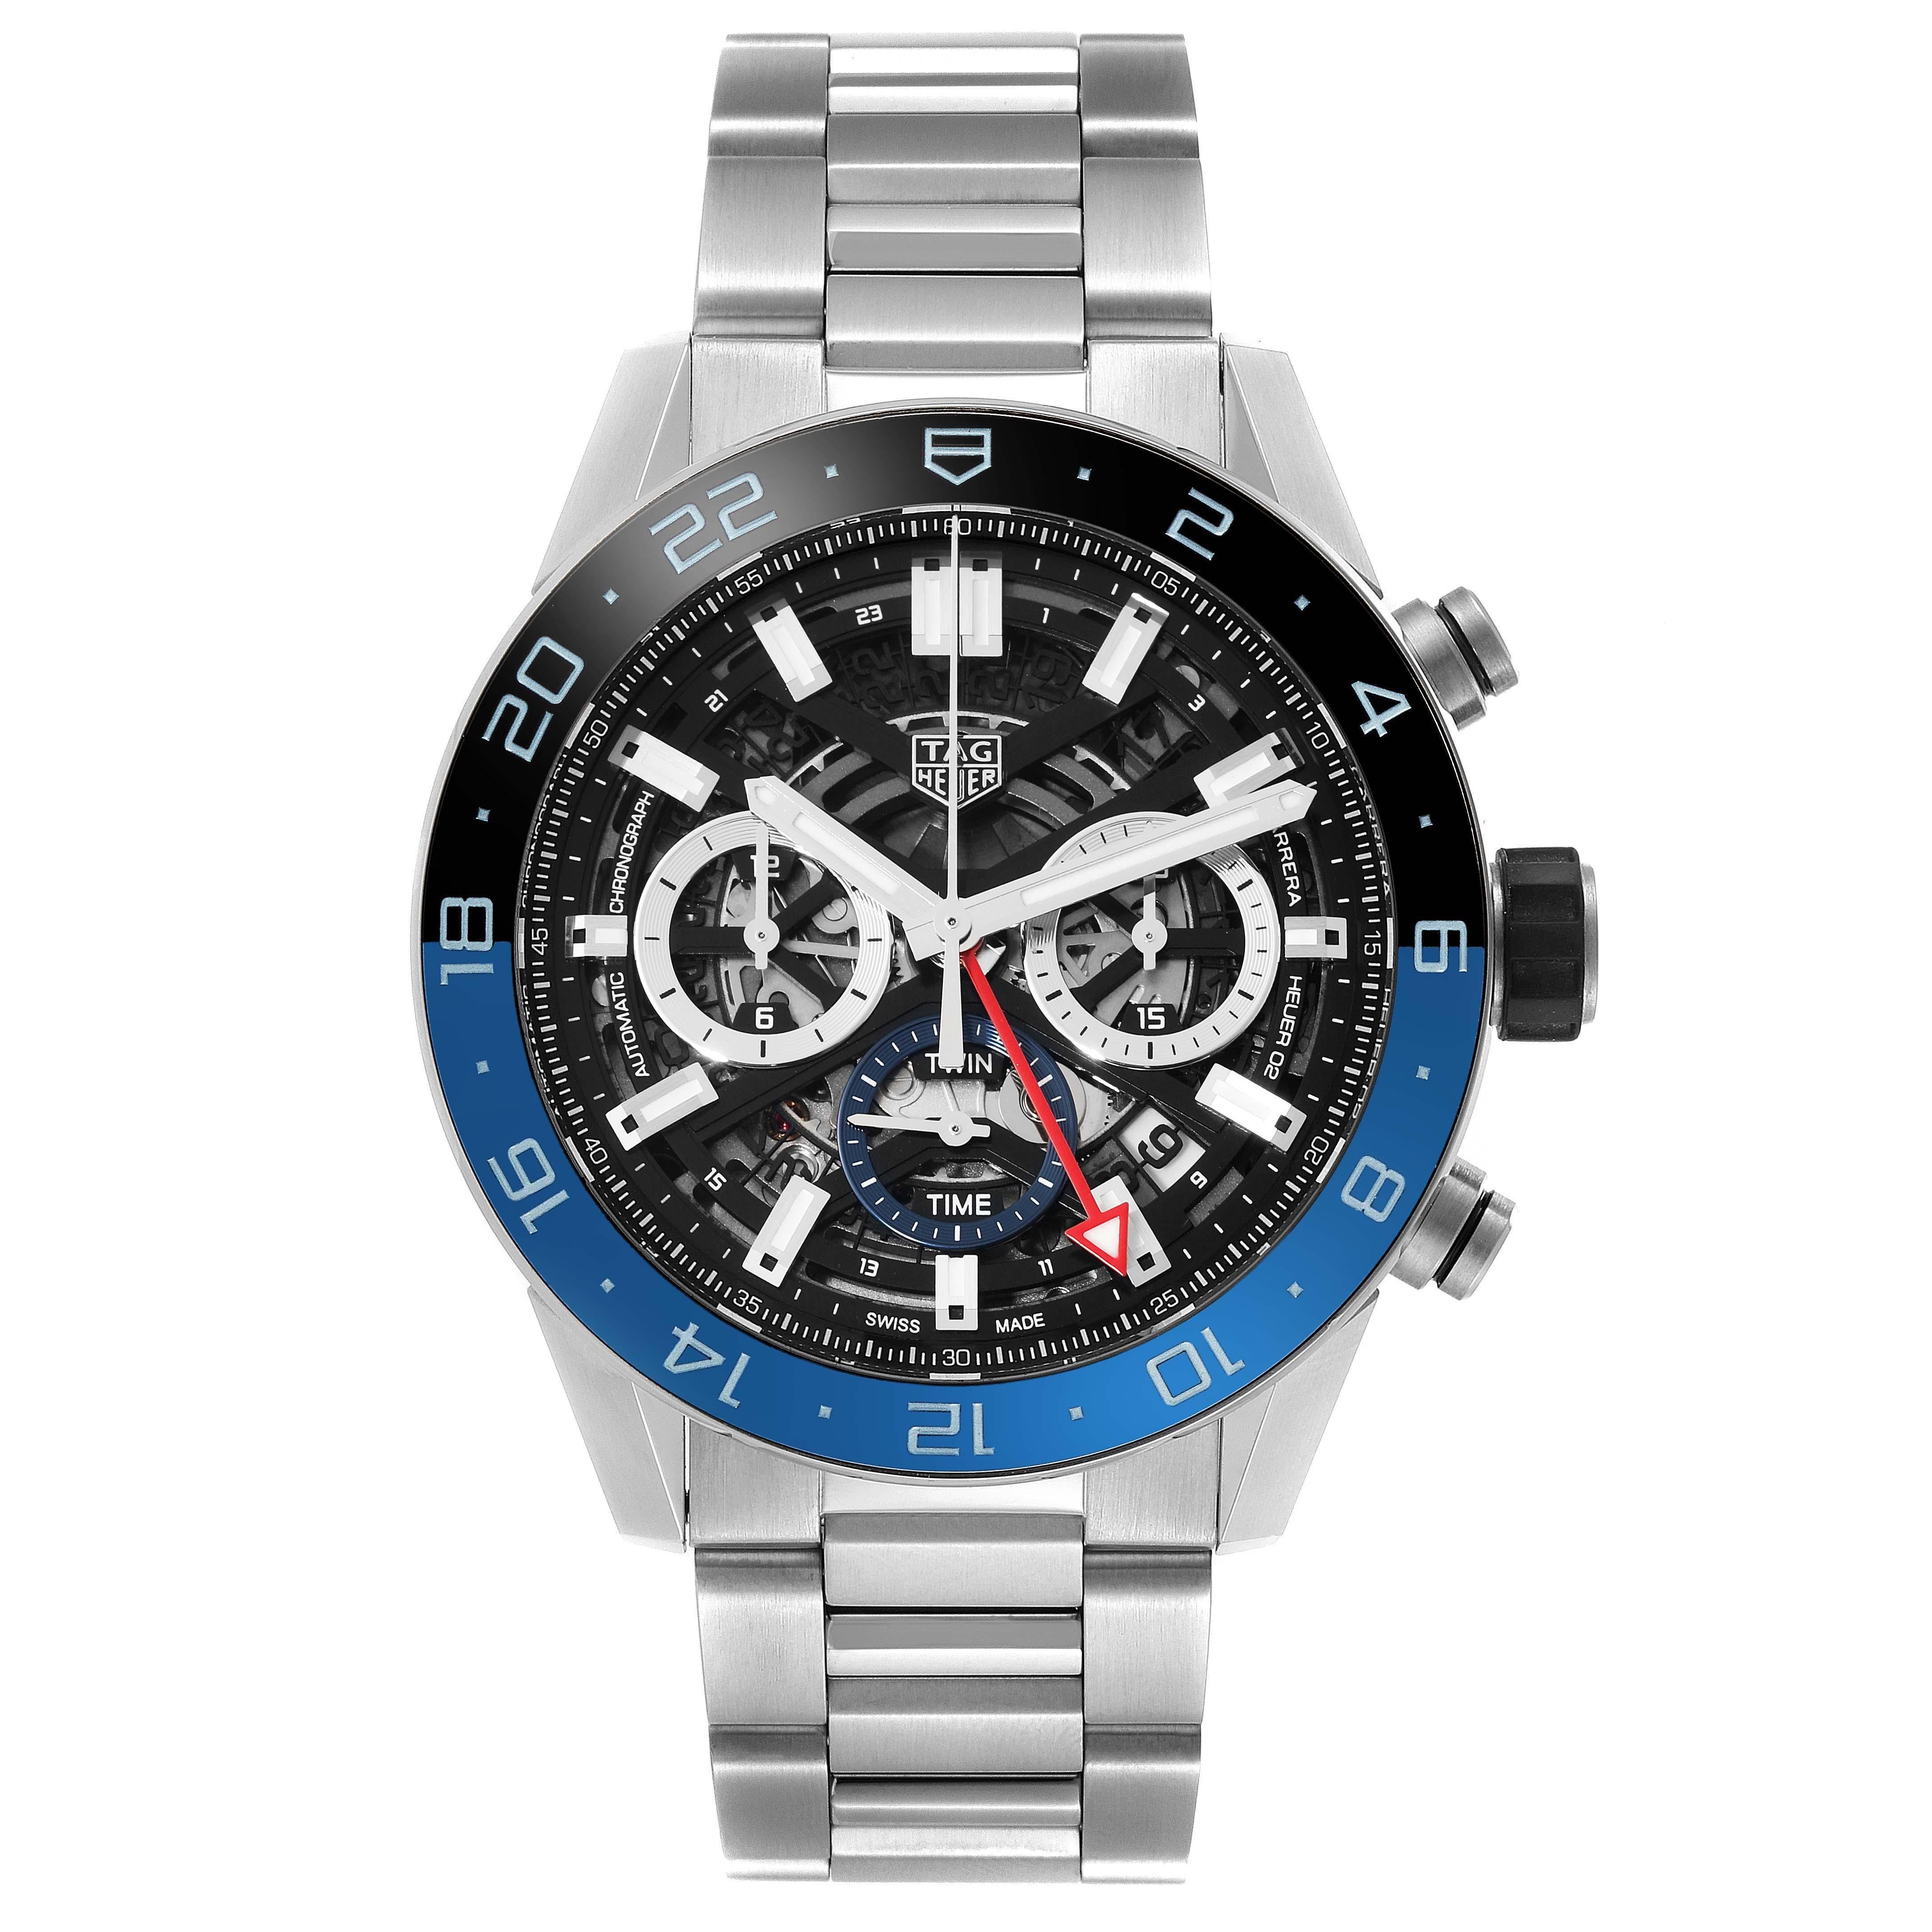 Tag Heuer Carrera GMT Batman Bezel Steel Mens Watch CBG2A1Z Box Card. Automatic self-winding chronograph movement with GMT function. Stainless steel case 45.0 mm. Transparent exhibition sapphire crystal caseback. Black and blue 